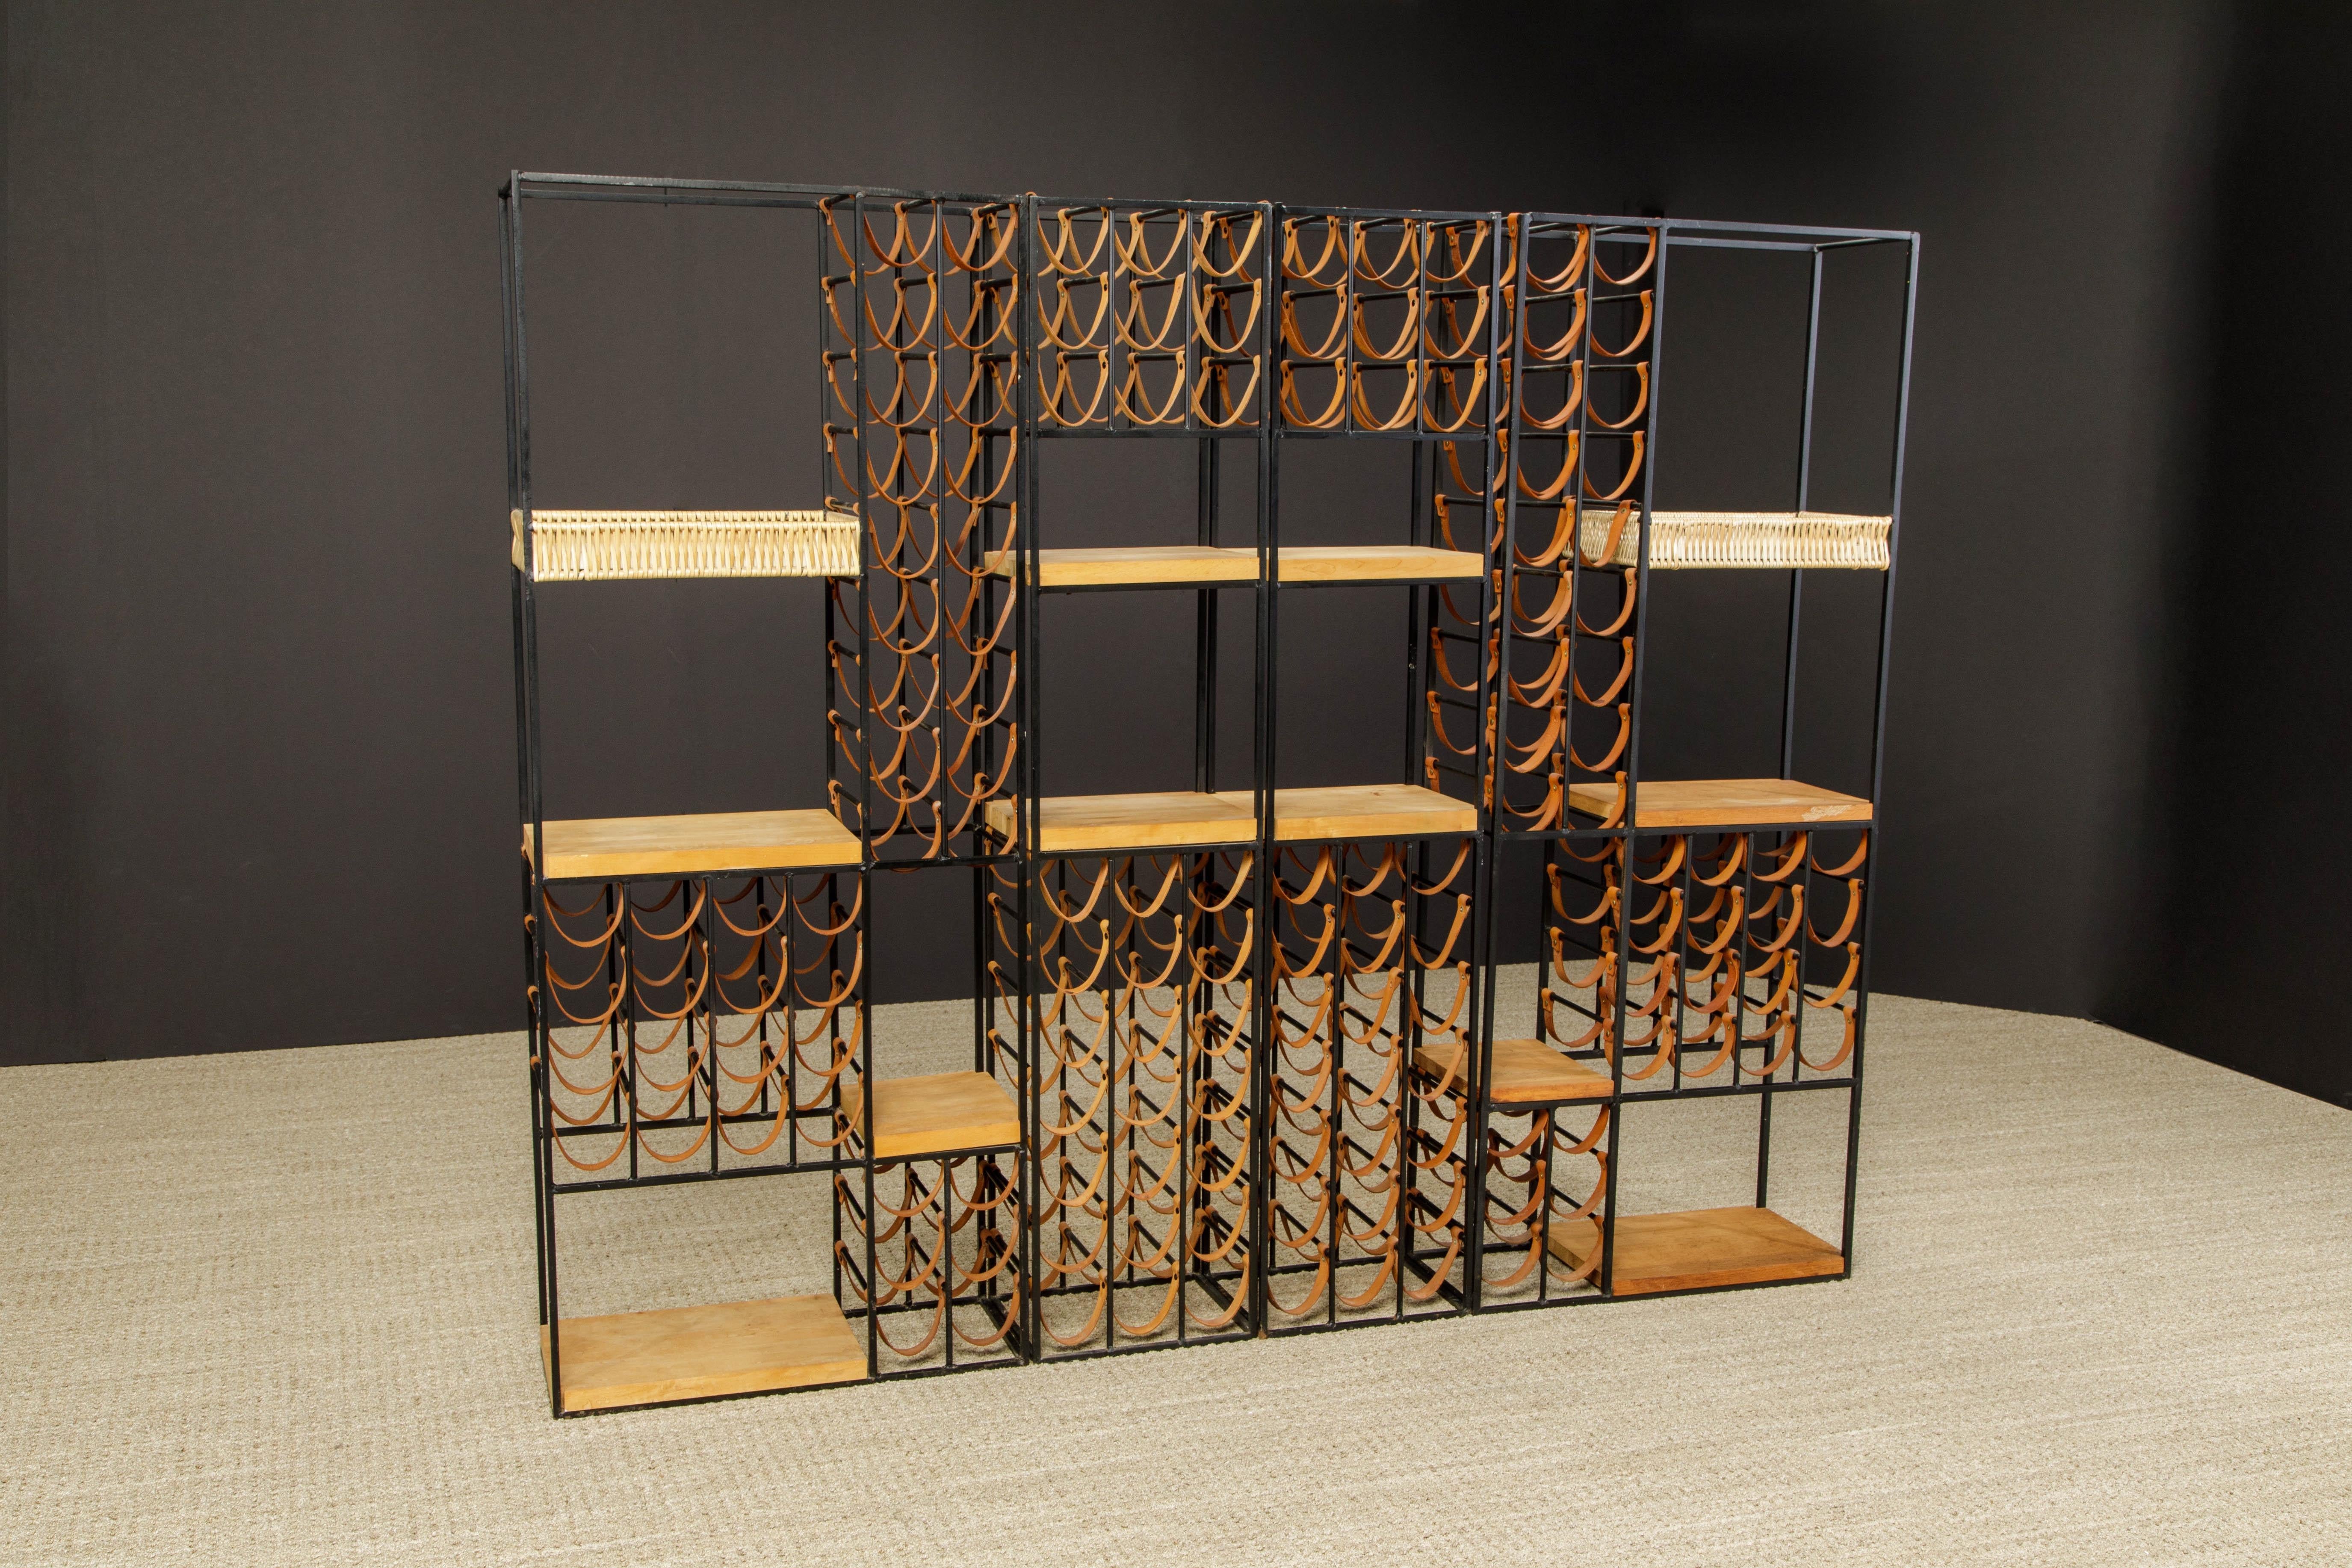 The ultimate entertaining piece, this Arthur Umanoff four section wine rack system and room divider which also incorporates an artful array of one hundred forty leather wine bottle holders, two wicker baskets, ten butcher block wooden shelves, and